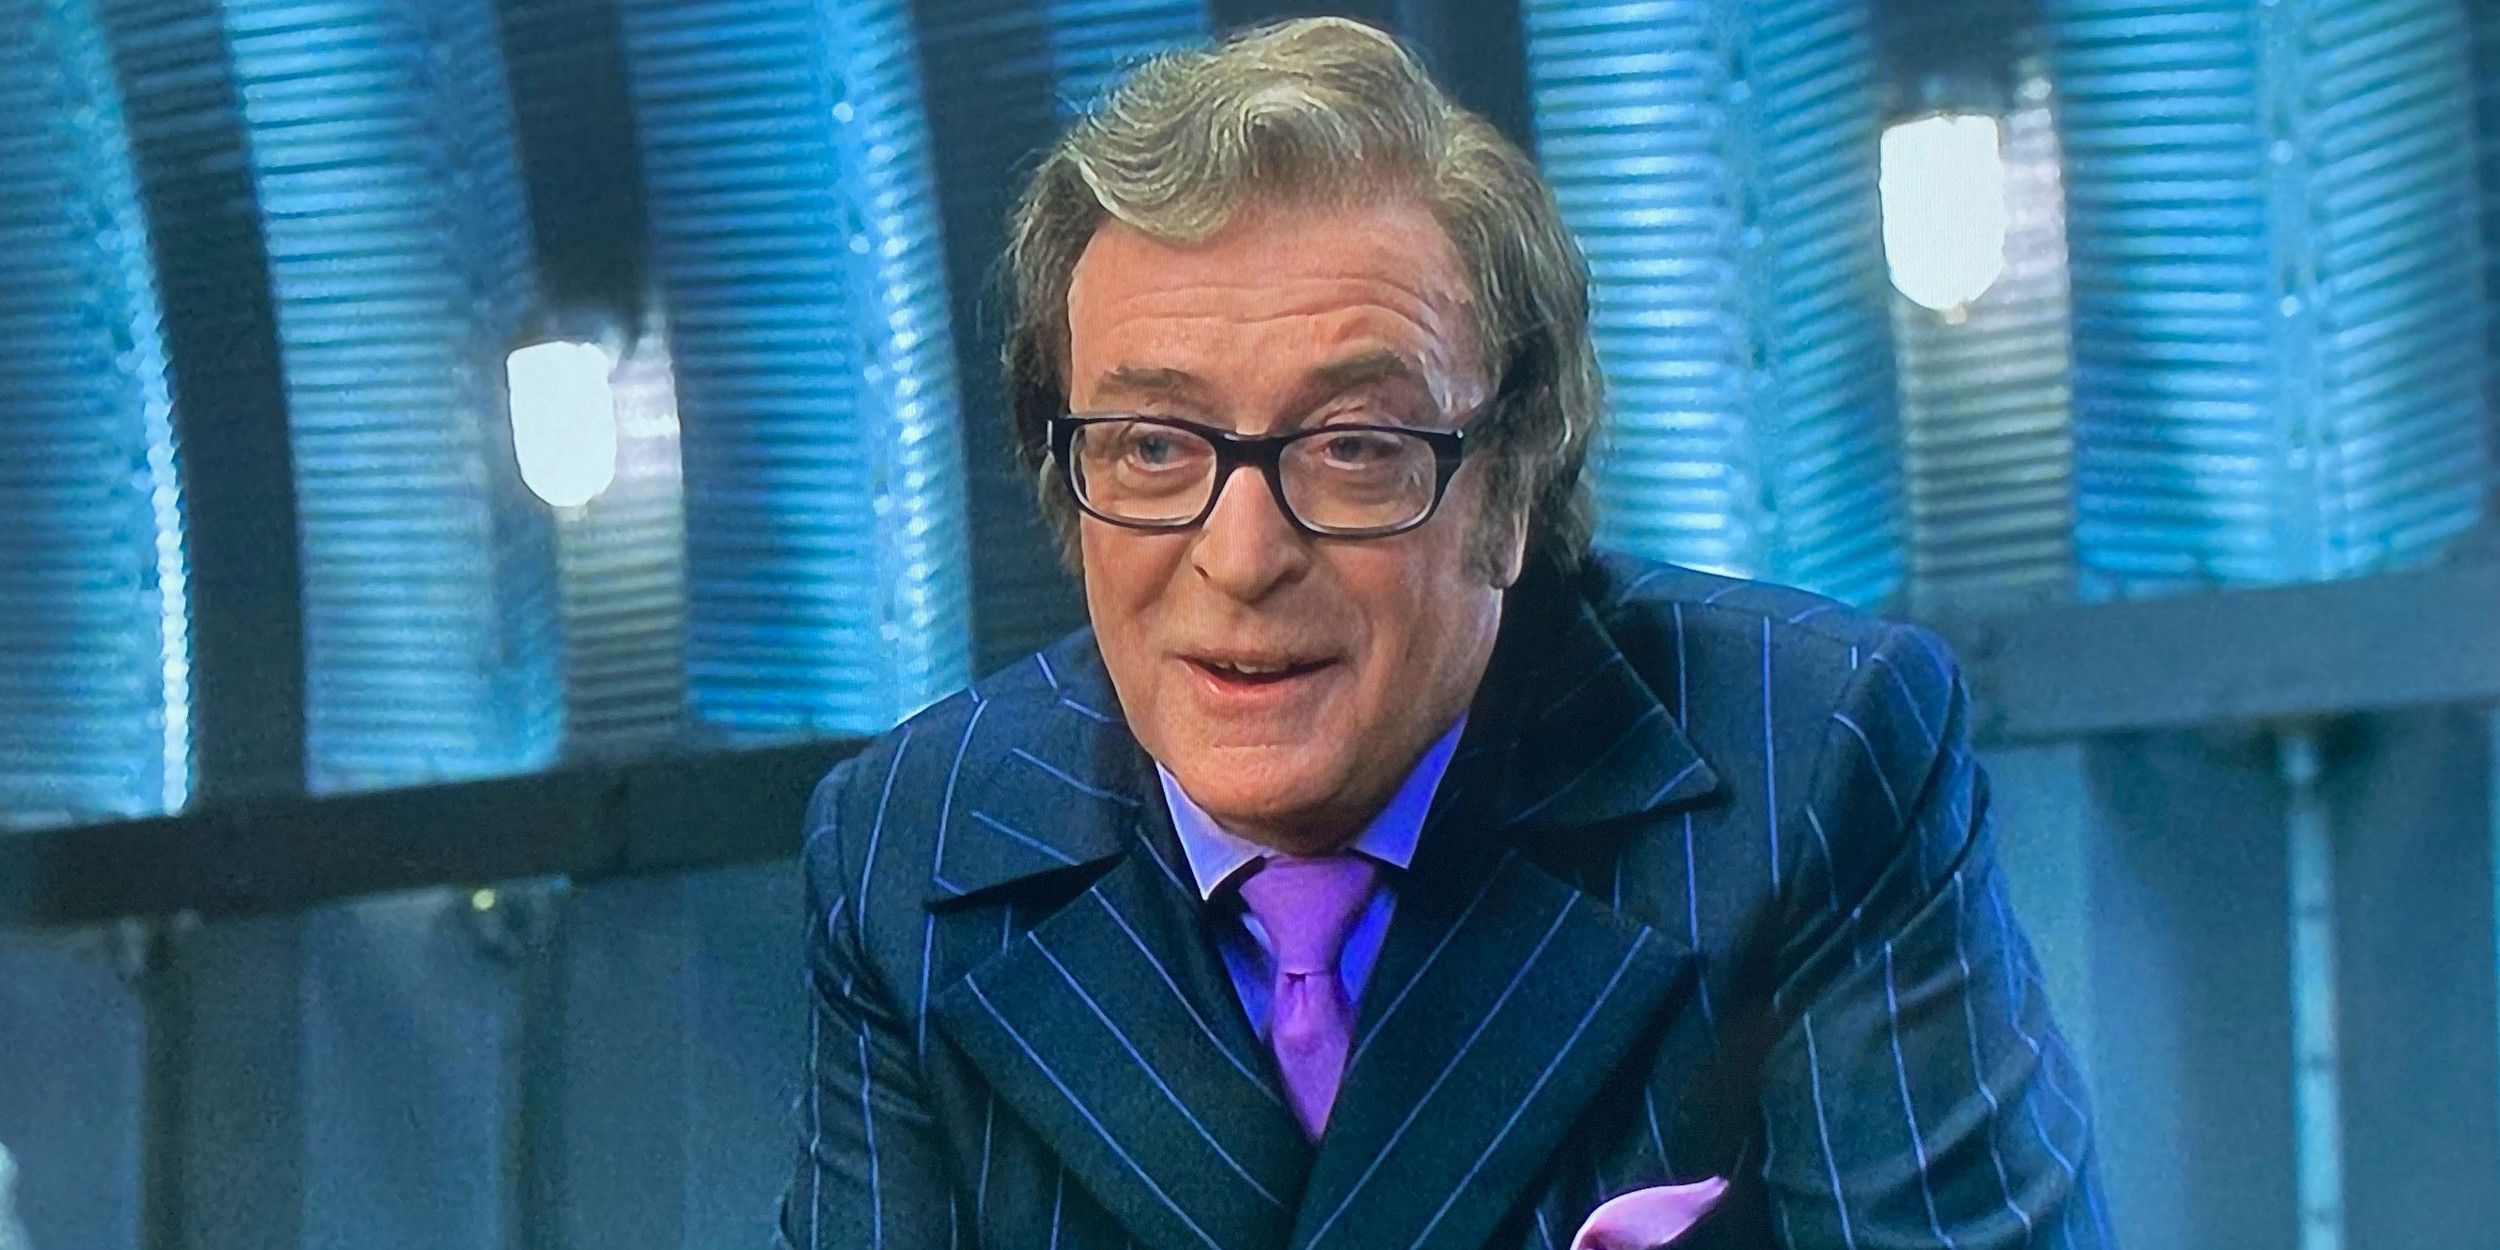 Michael Caine as Nigel in Austin Powers Goldmember